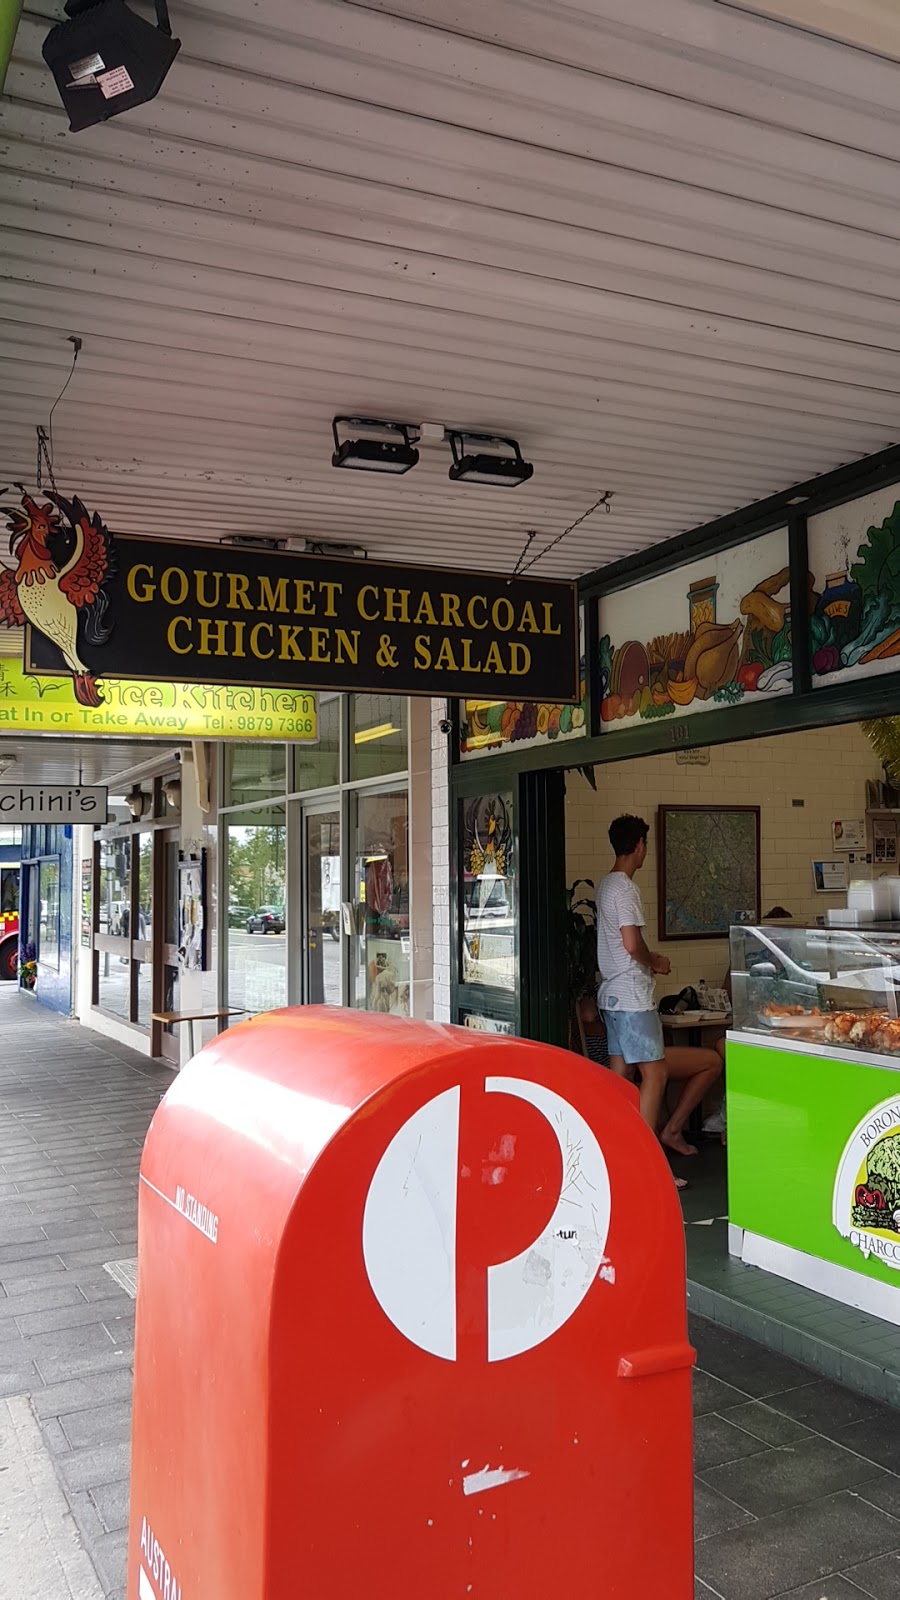 Boronia Park Gourmet Charcoal Chicken & Salad | 101 Pittwater Rd, Hunters Hill NSW 2110, Australia | Phone: (02) 9817 3998